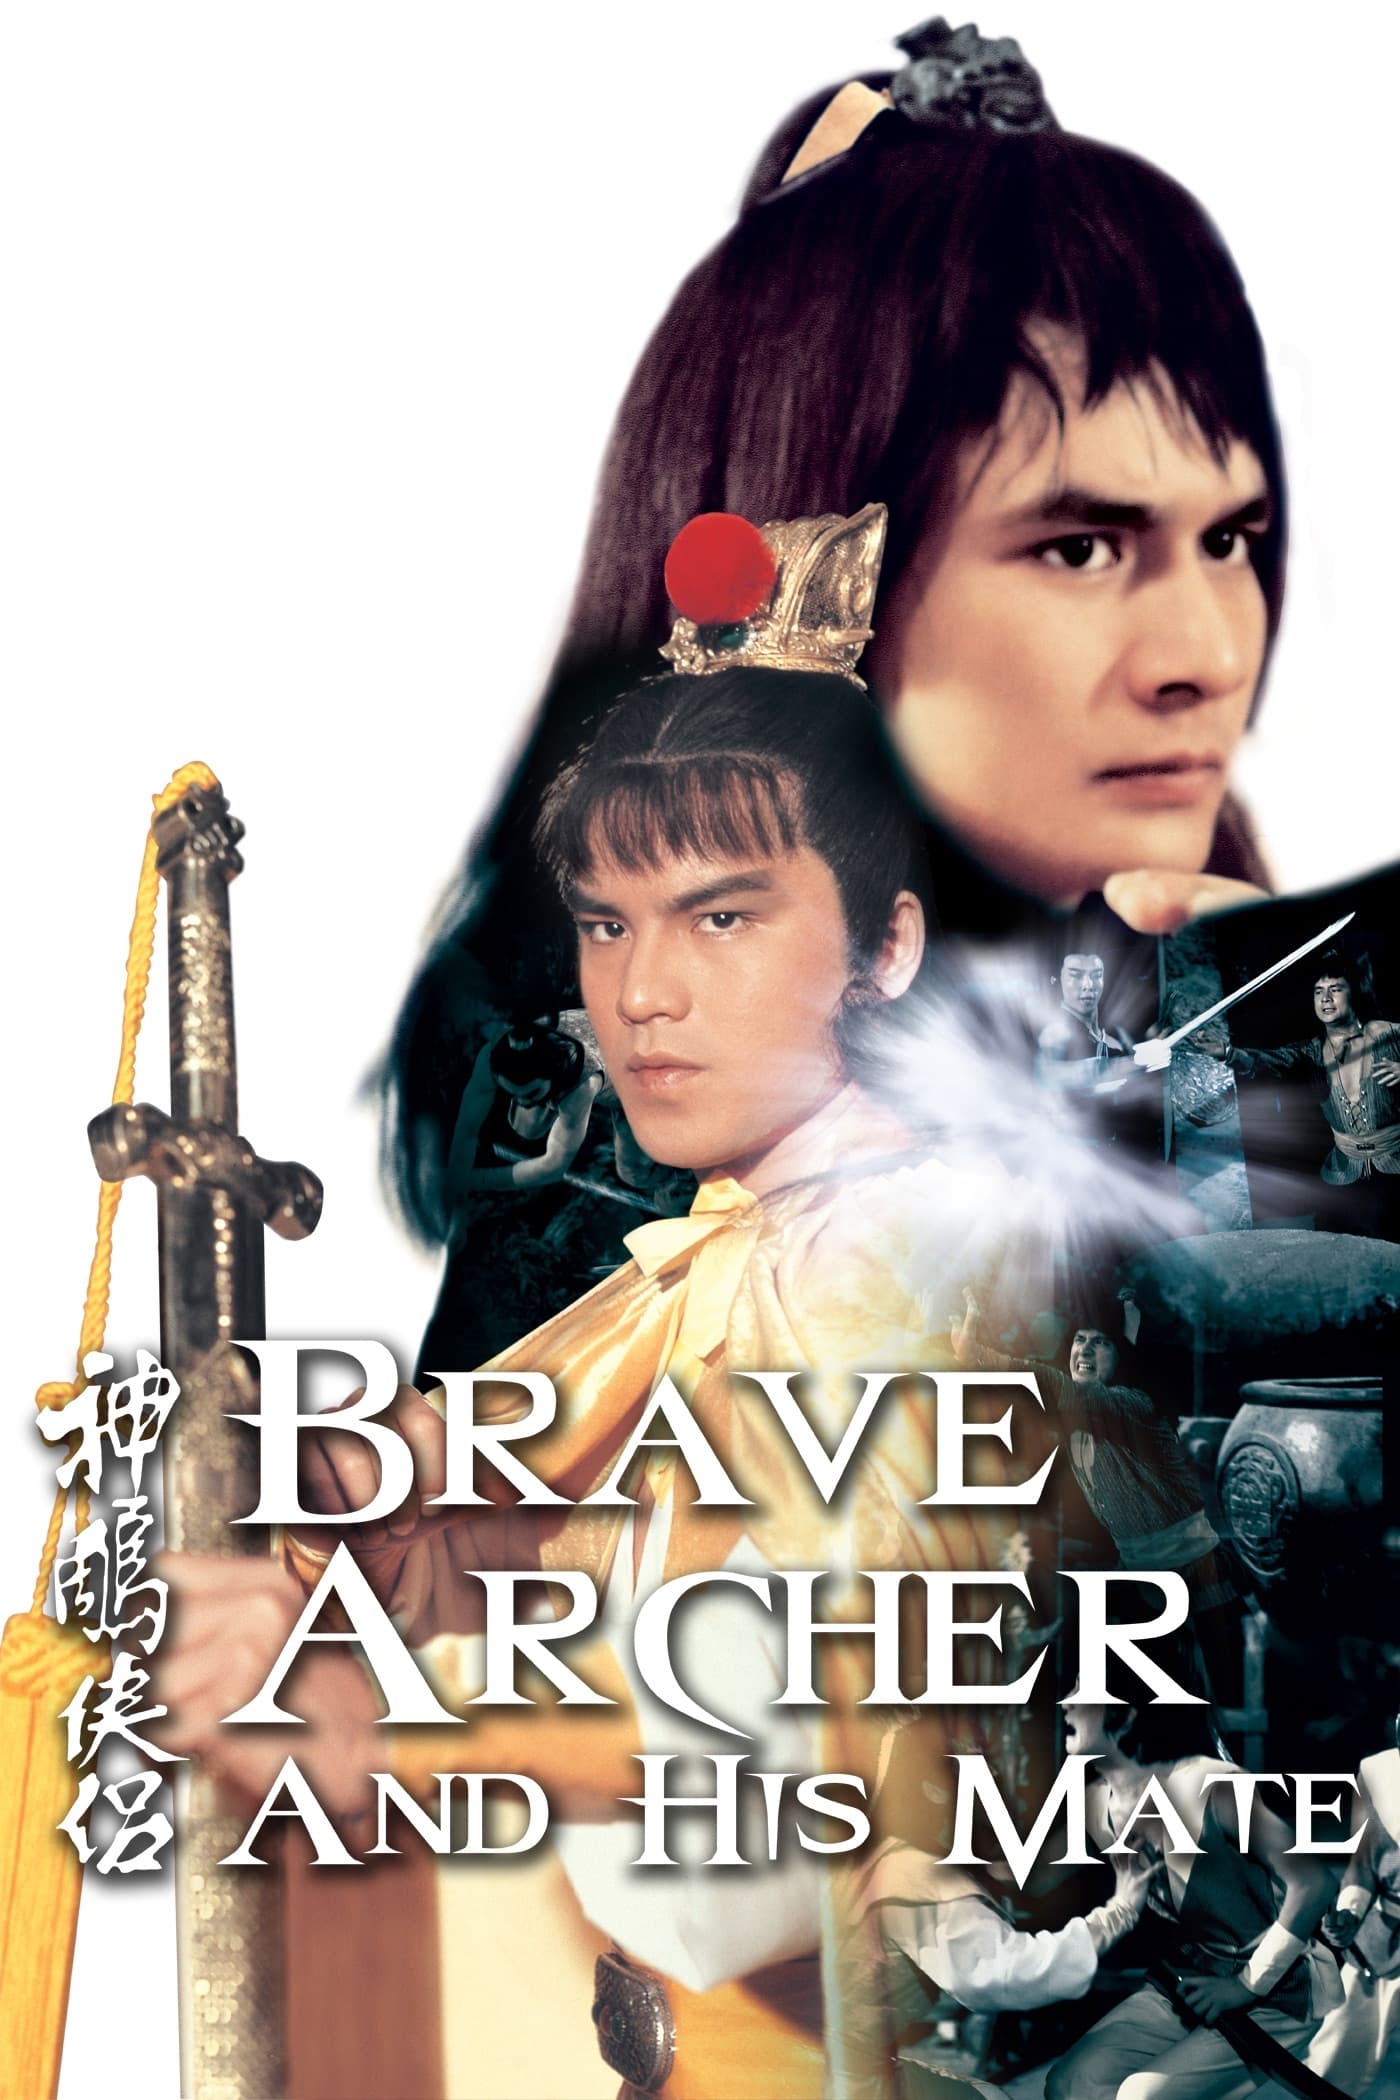 The Brave Archer and His Mate (1982)